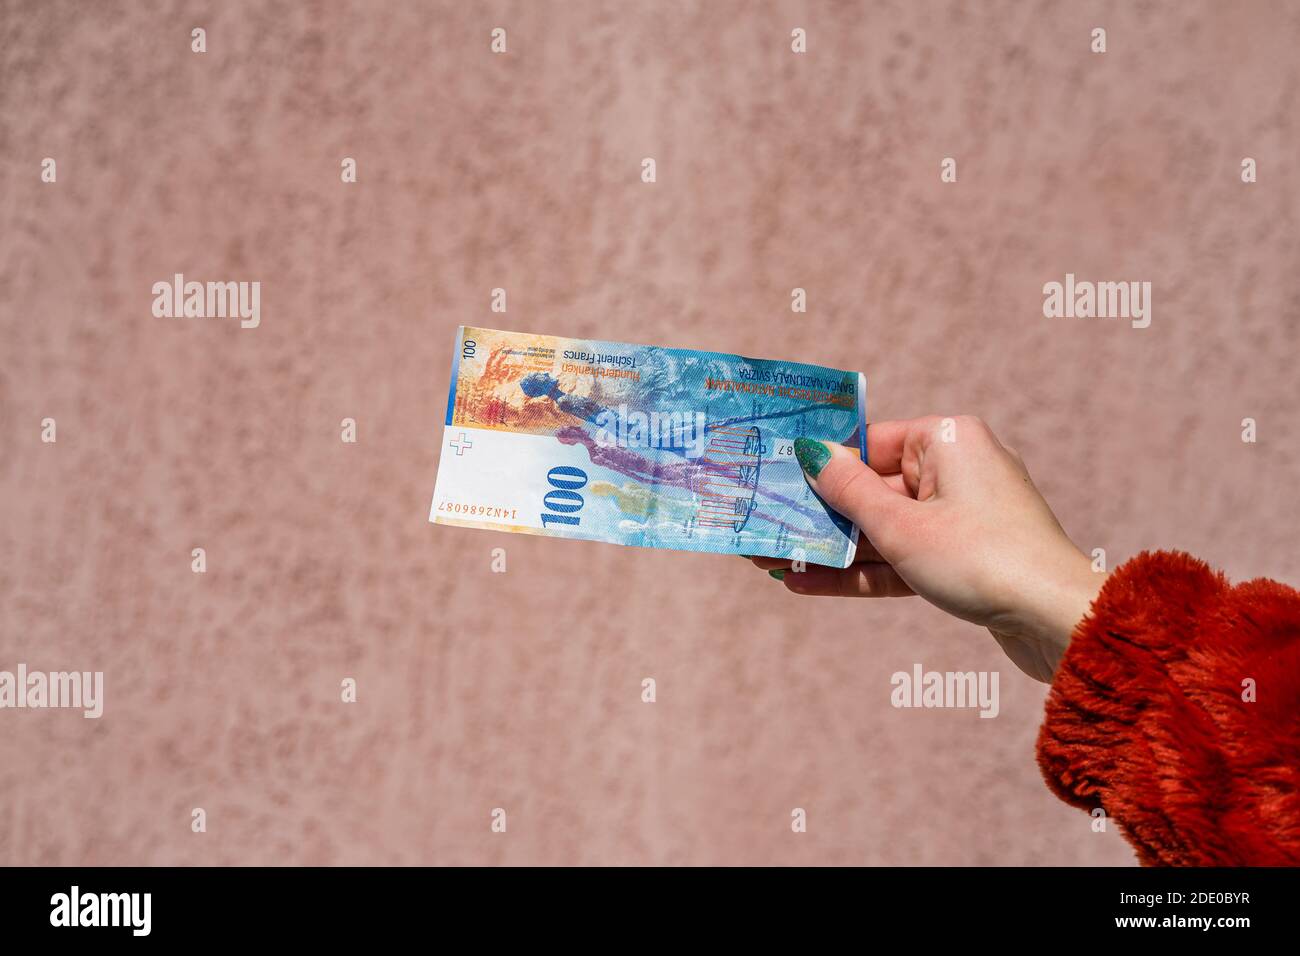 Hand Holding Showing Euro Money And Giving Or Receiving Money Like Tips Salary 100 Swiss Franc Banknotes Chf Currency Isolated Concept Of Rich Busi Stock Photo Alamy